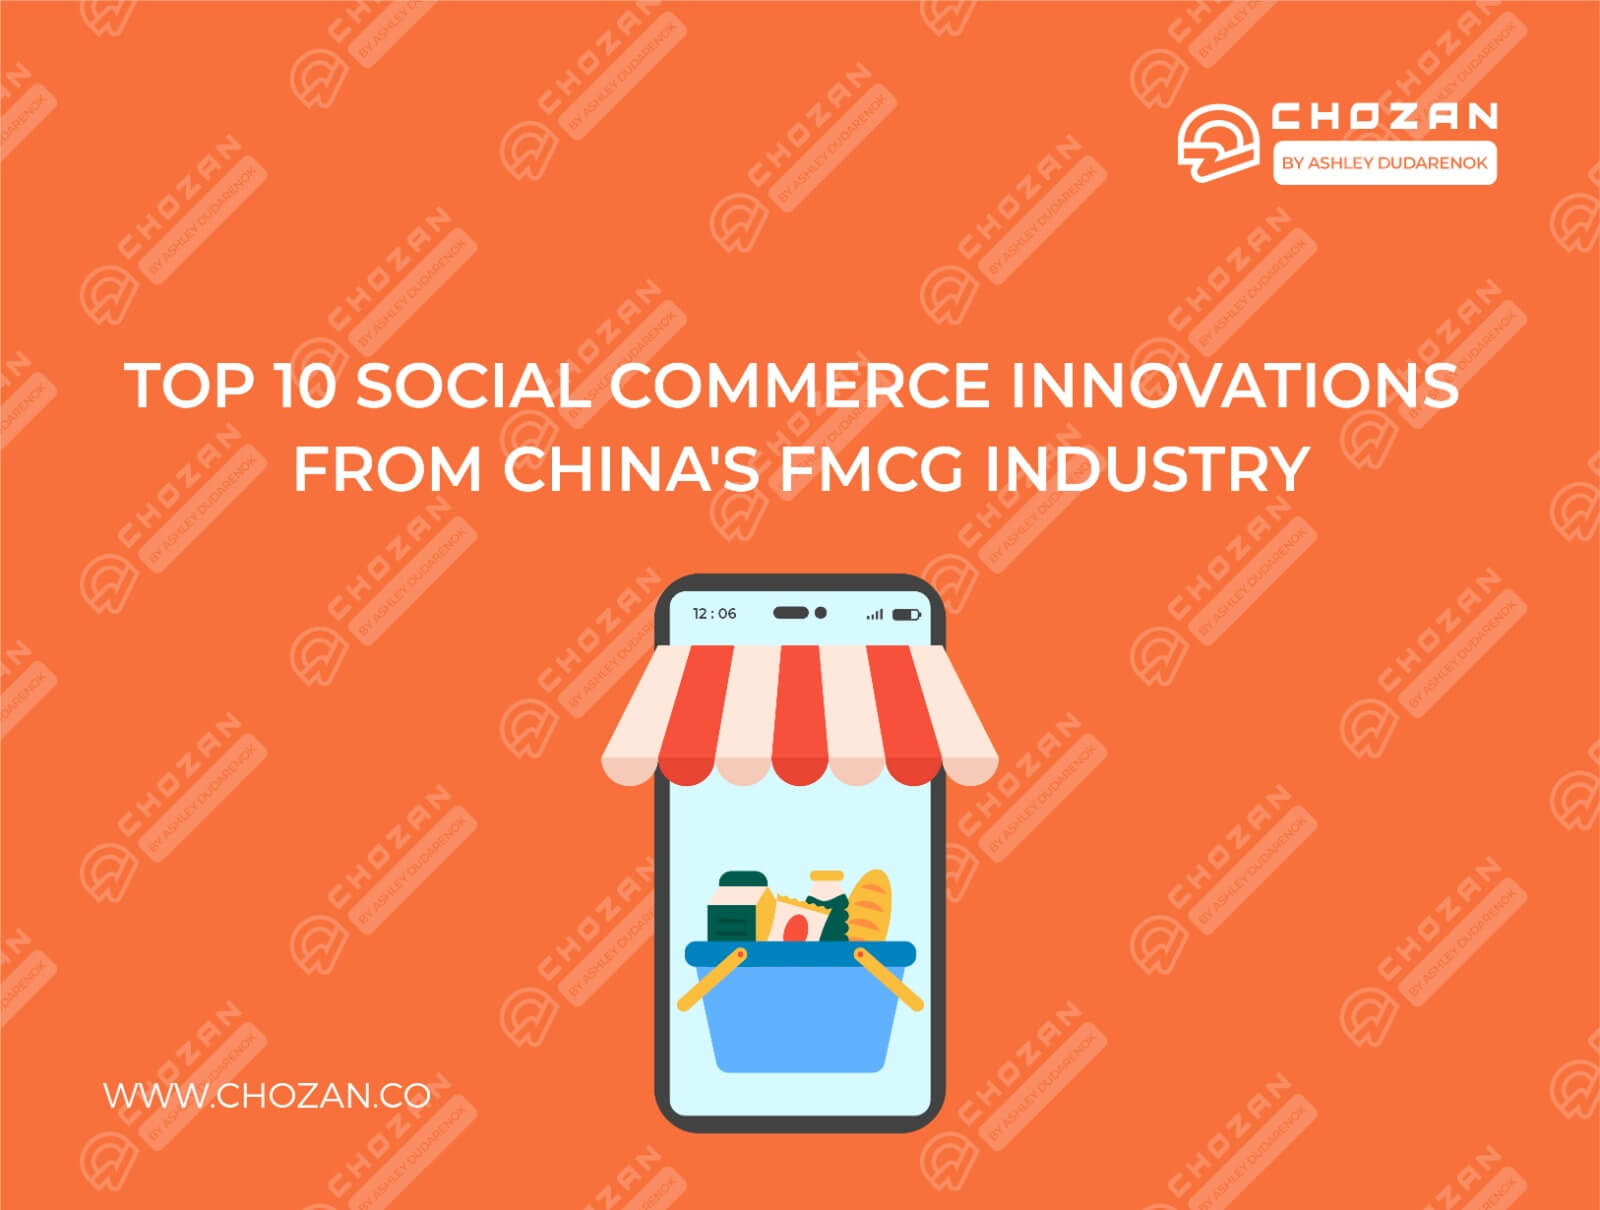 Top 10 Social Commerce Innovations from China’s FMCG industry